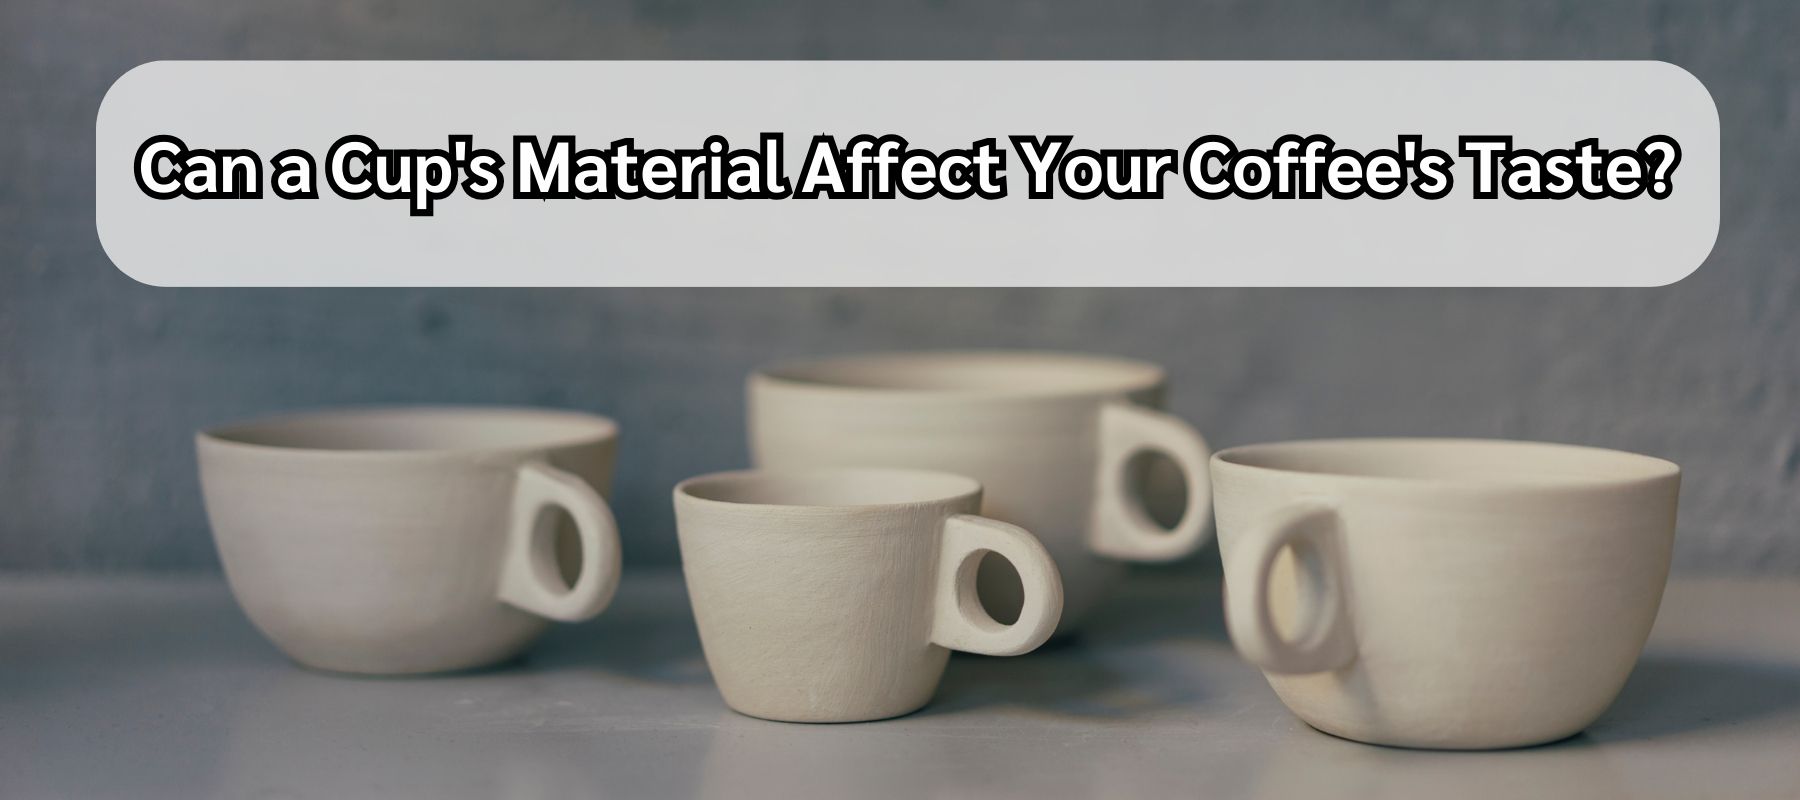 Can-a-Cup's-Material-Affect-Your-Coffee's-Taste?